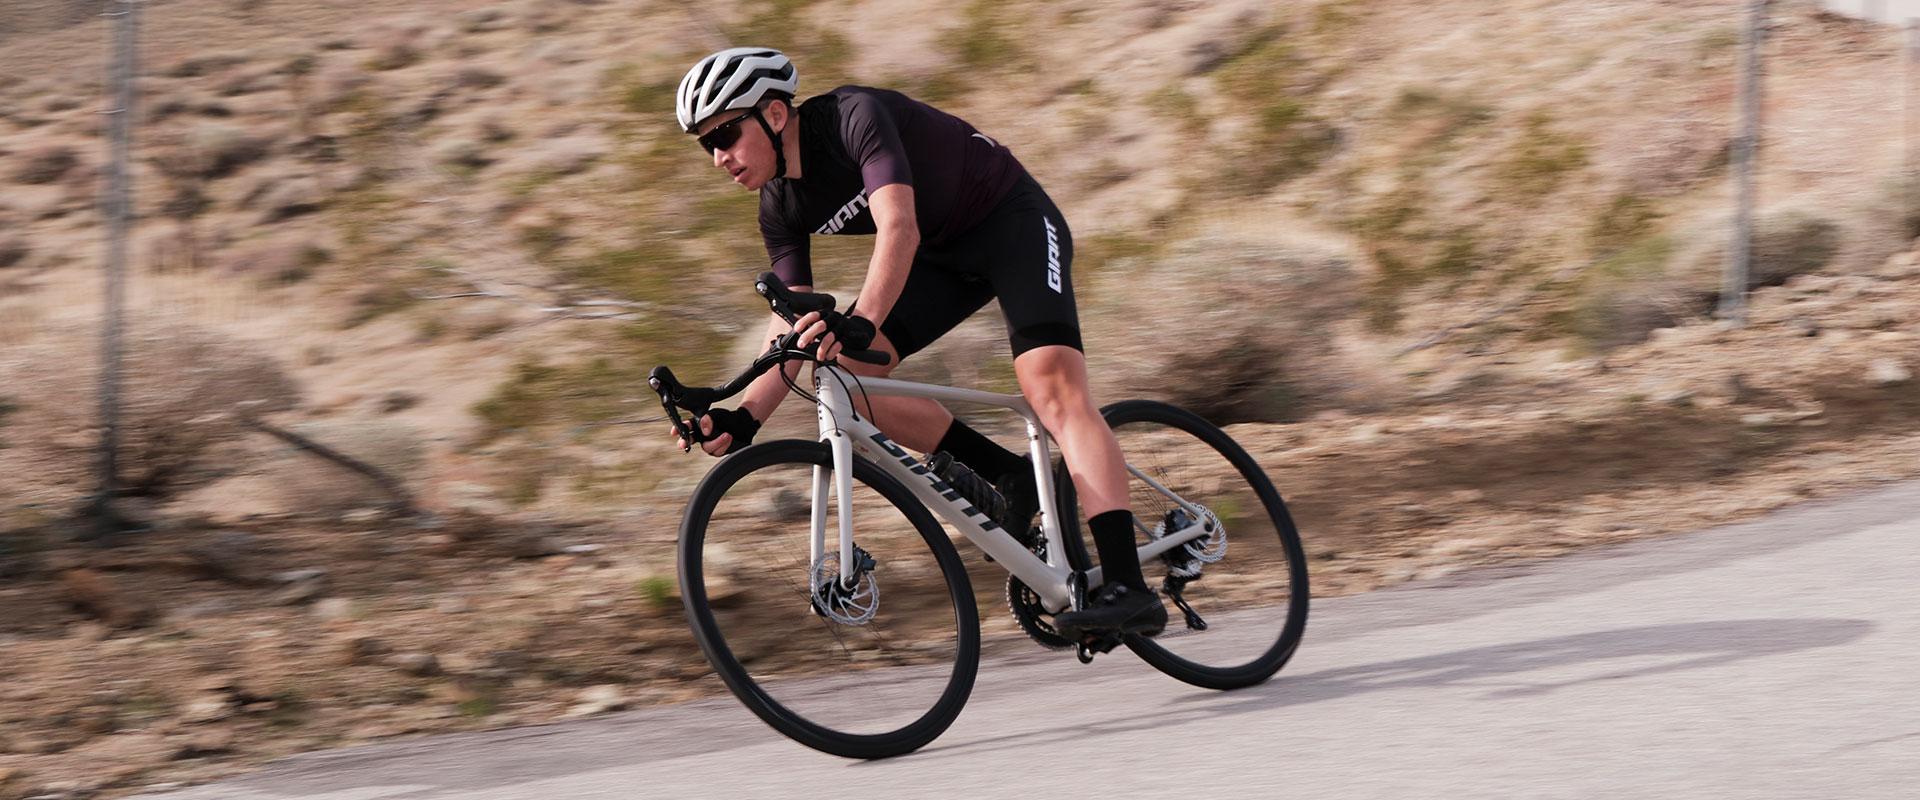 SLR 2 42 Disc WheelSystem | Giant Bicycles Official site